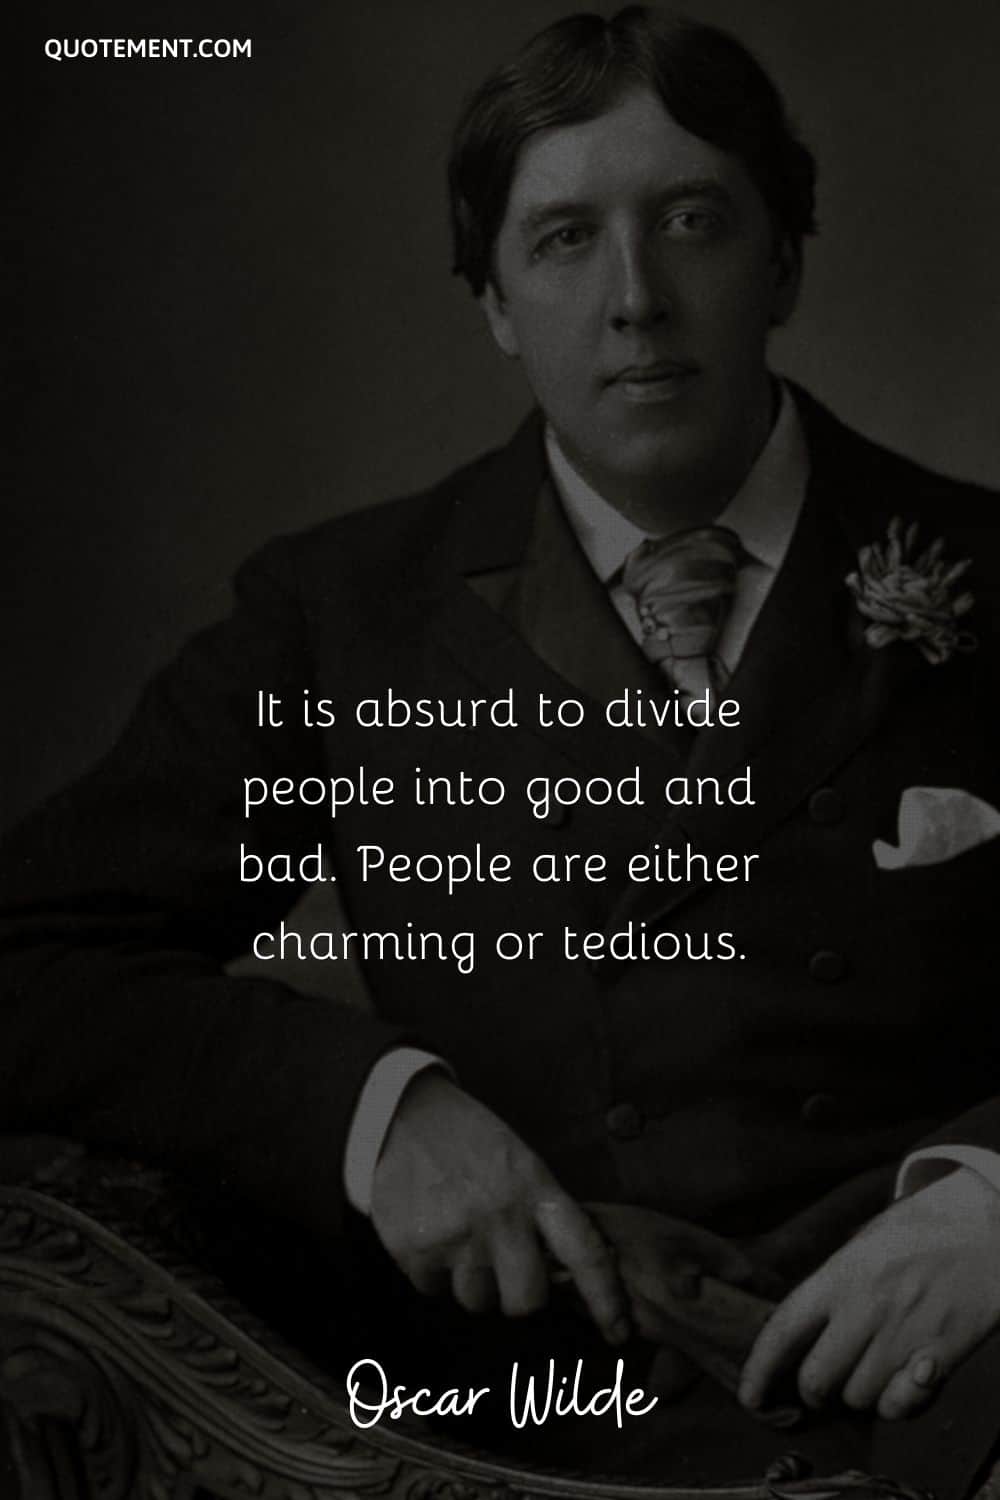 It is absurd to divide people into good and bad